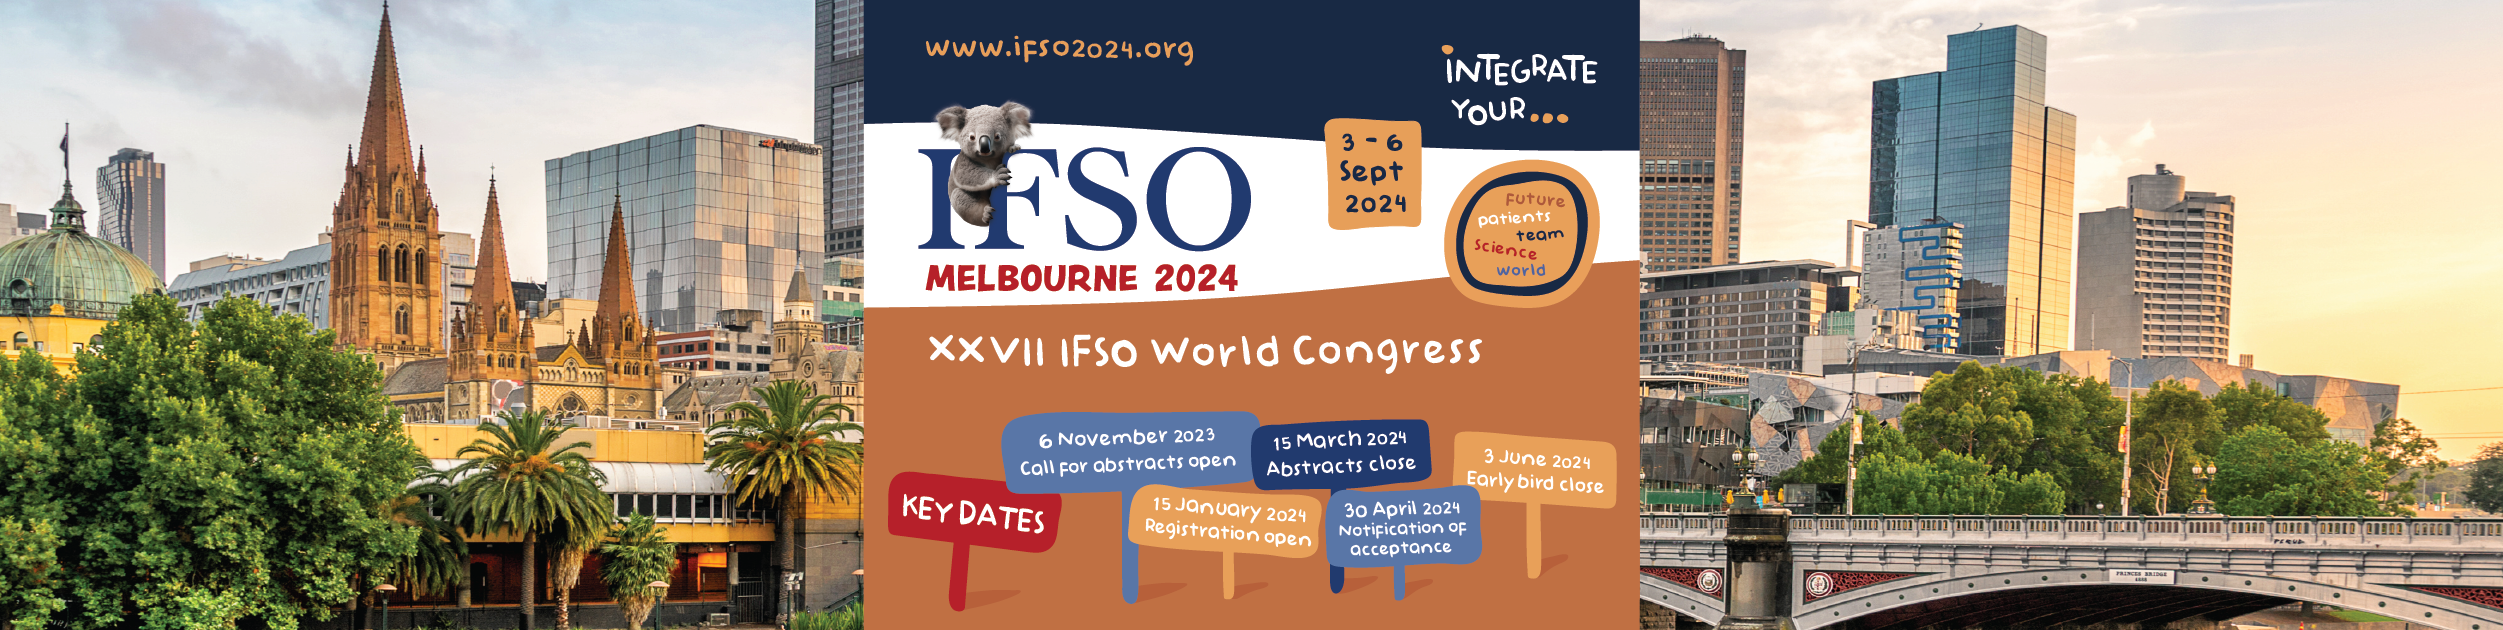 ifso 2024 postcard home updated animated 2